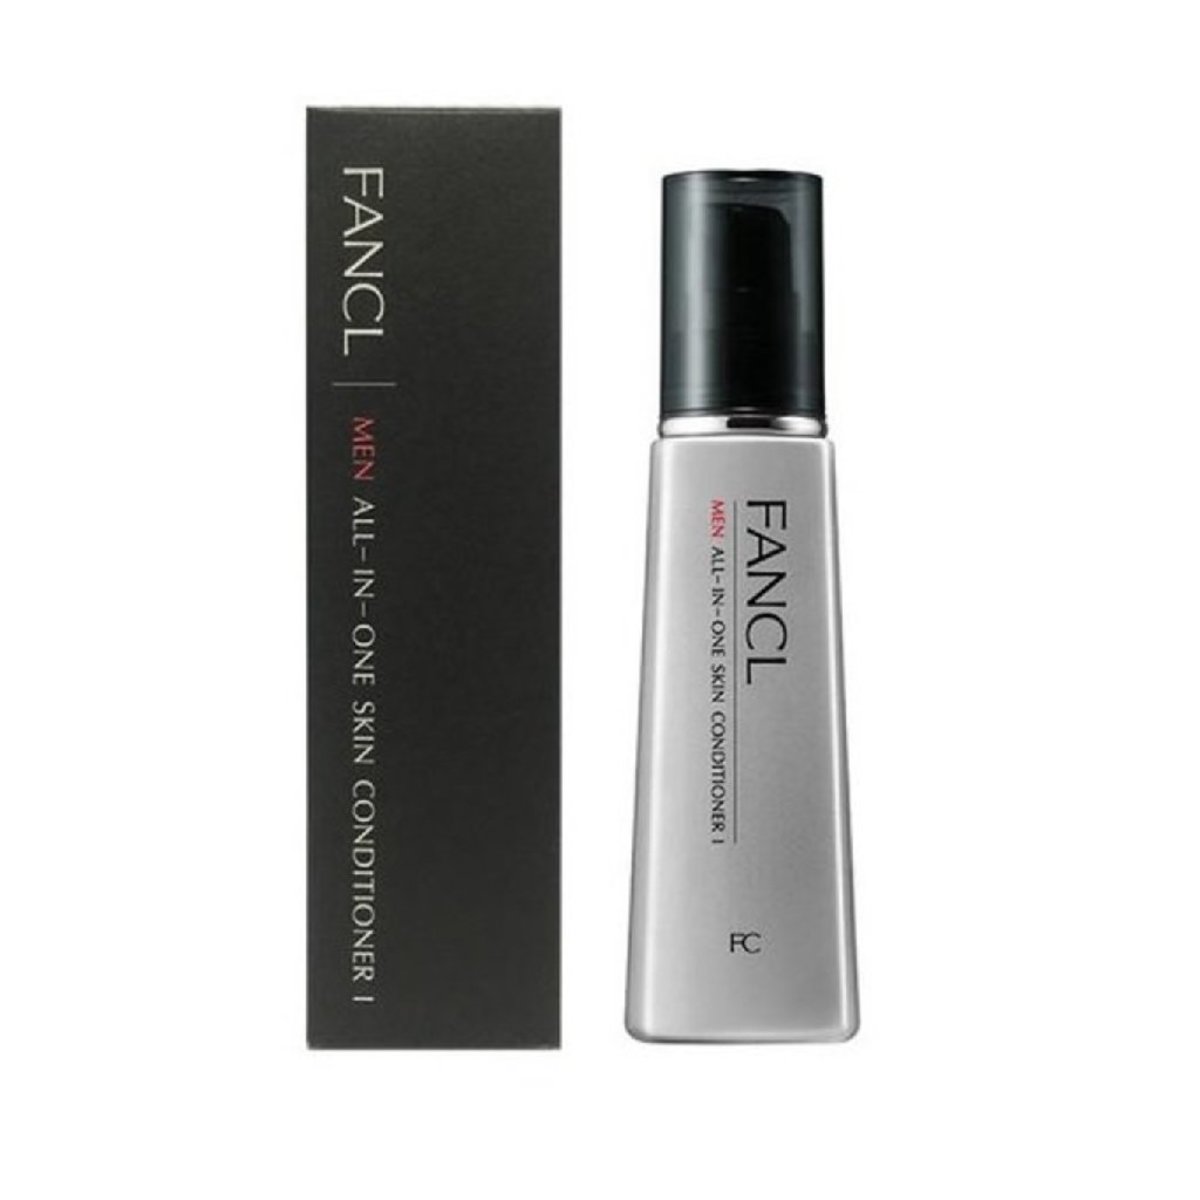 Fancl Men All in one Skin Conditioner 60ml – W Cosmetics